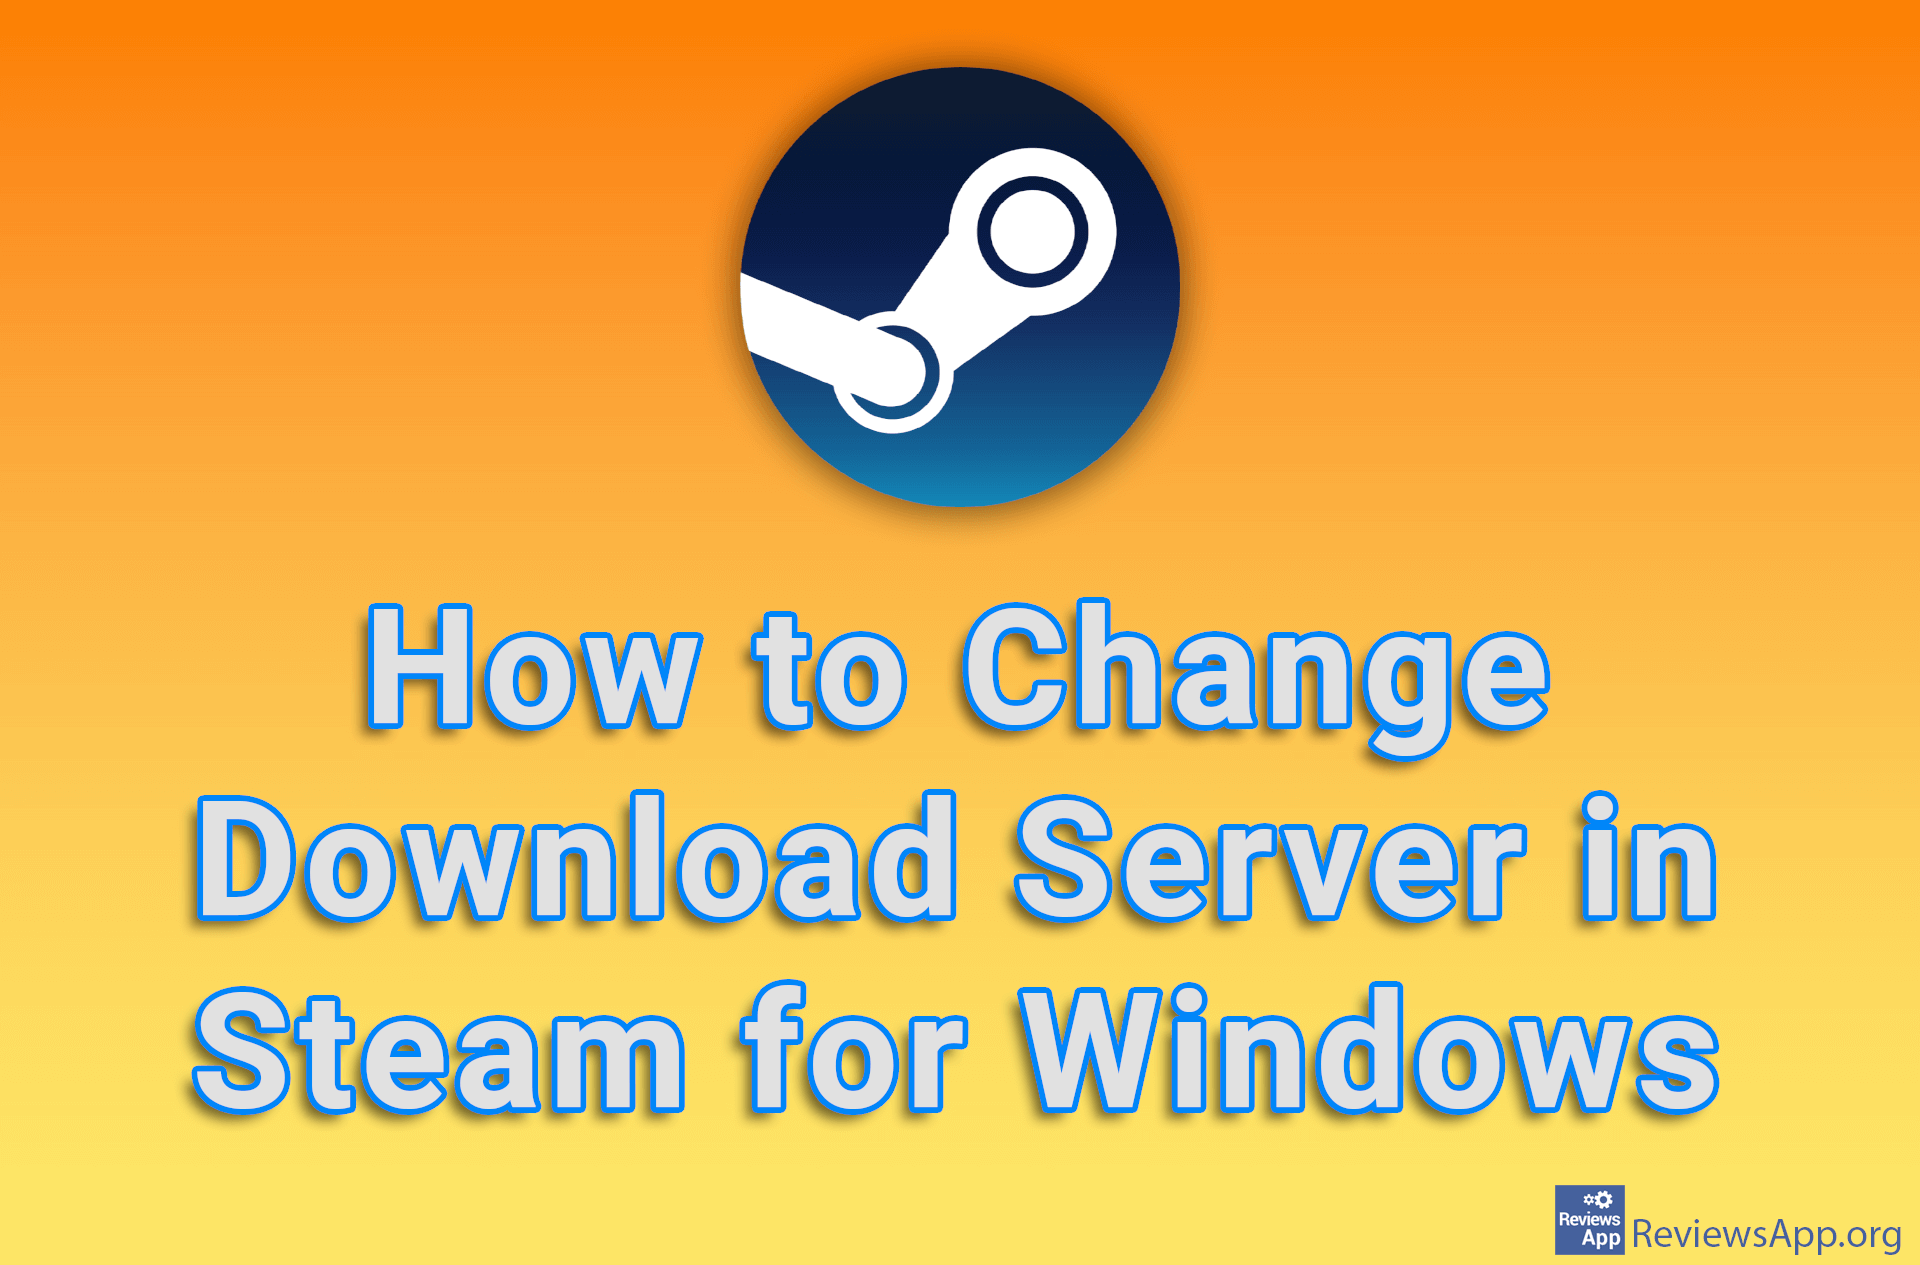 How to Change Download Server in Steam for Windows